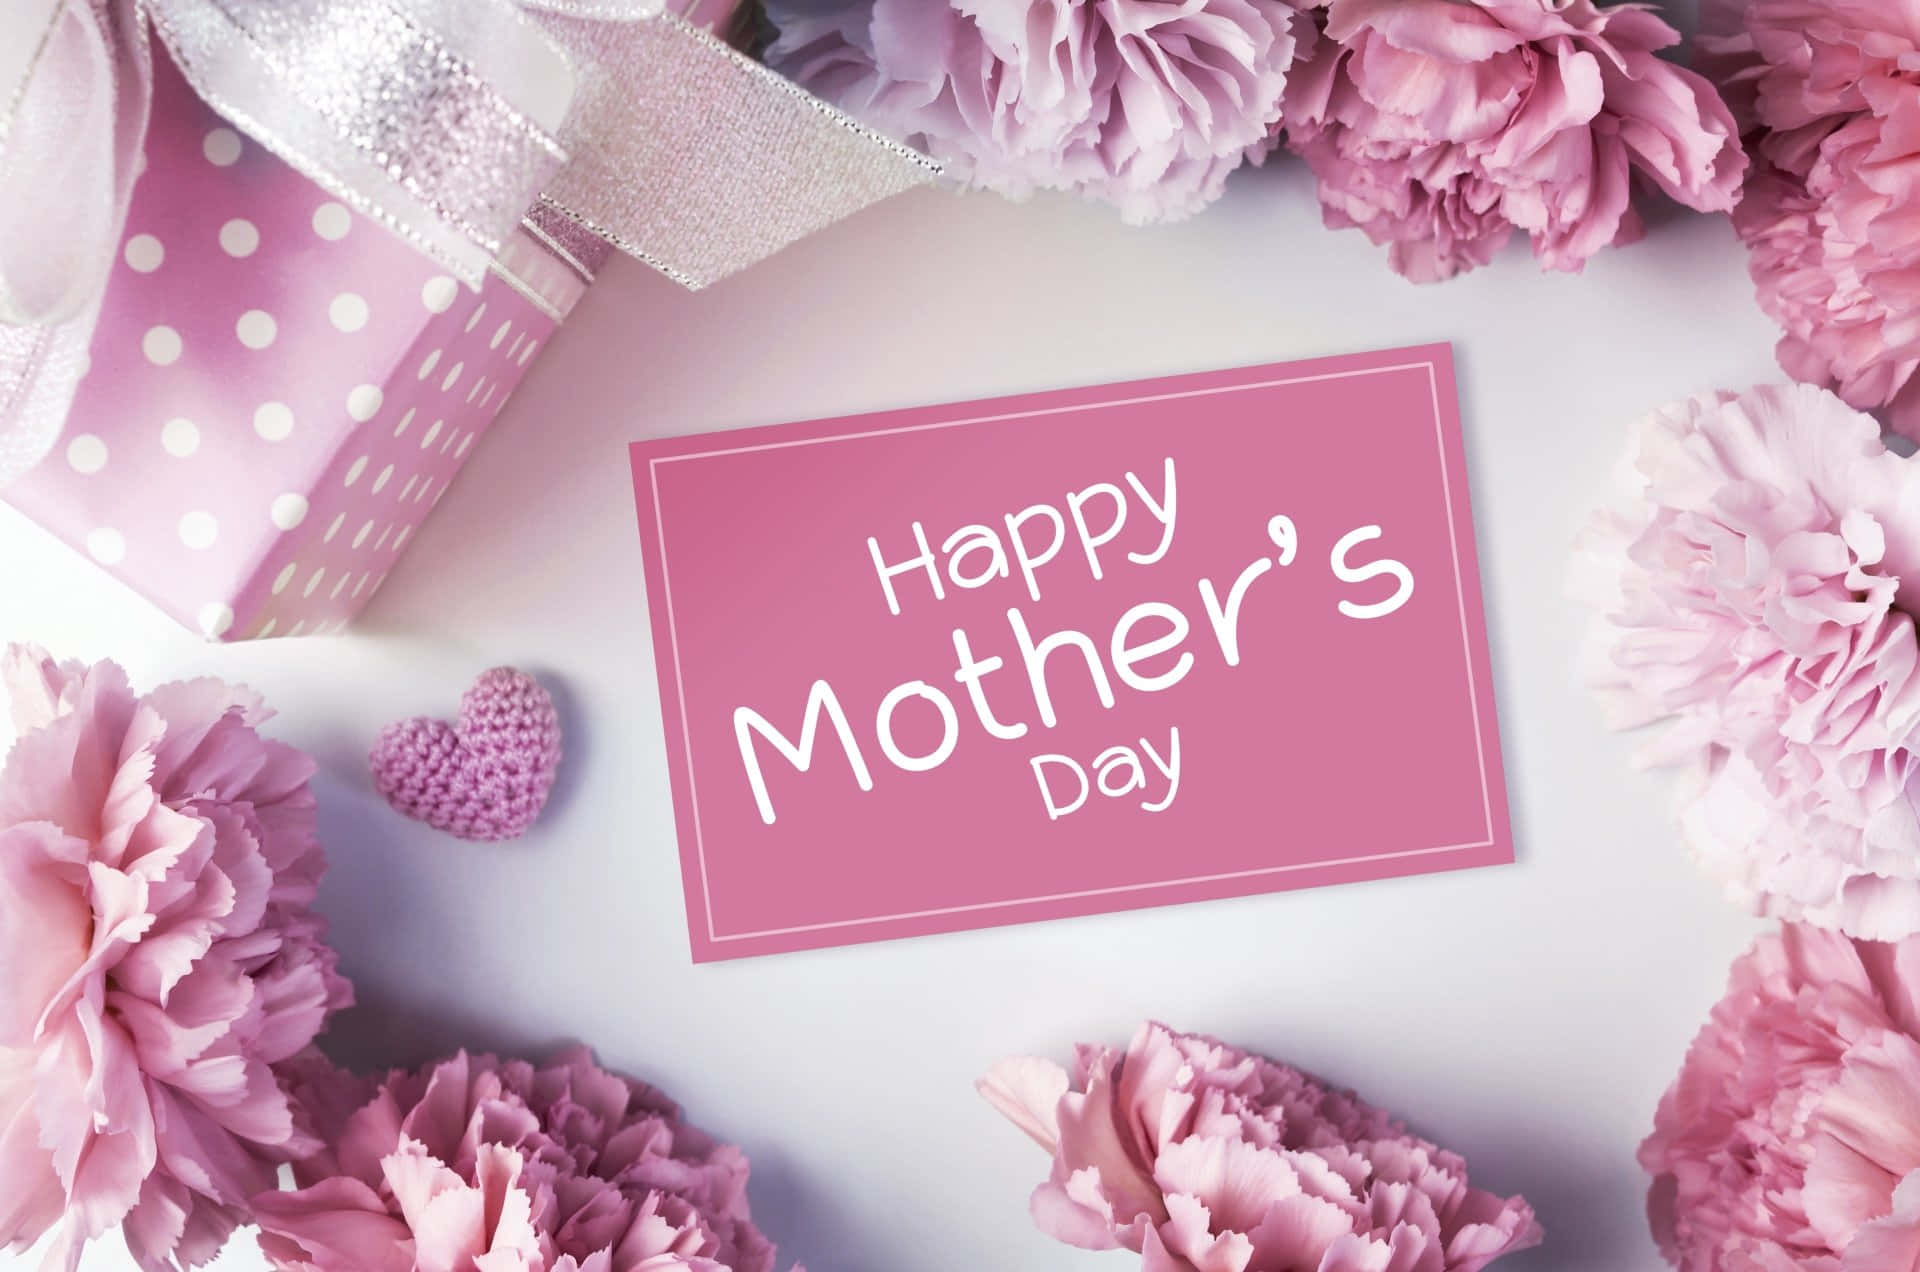 Celebrate Mom on Mother's Day!